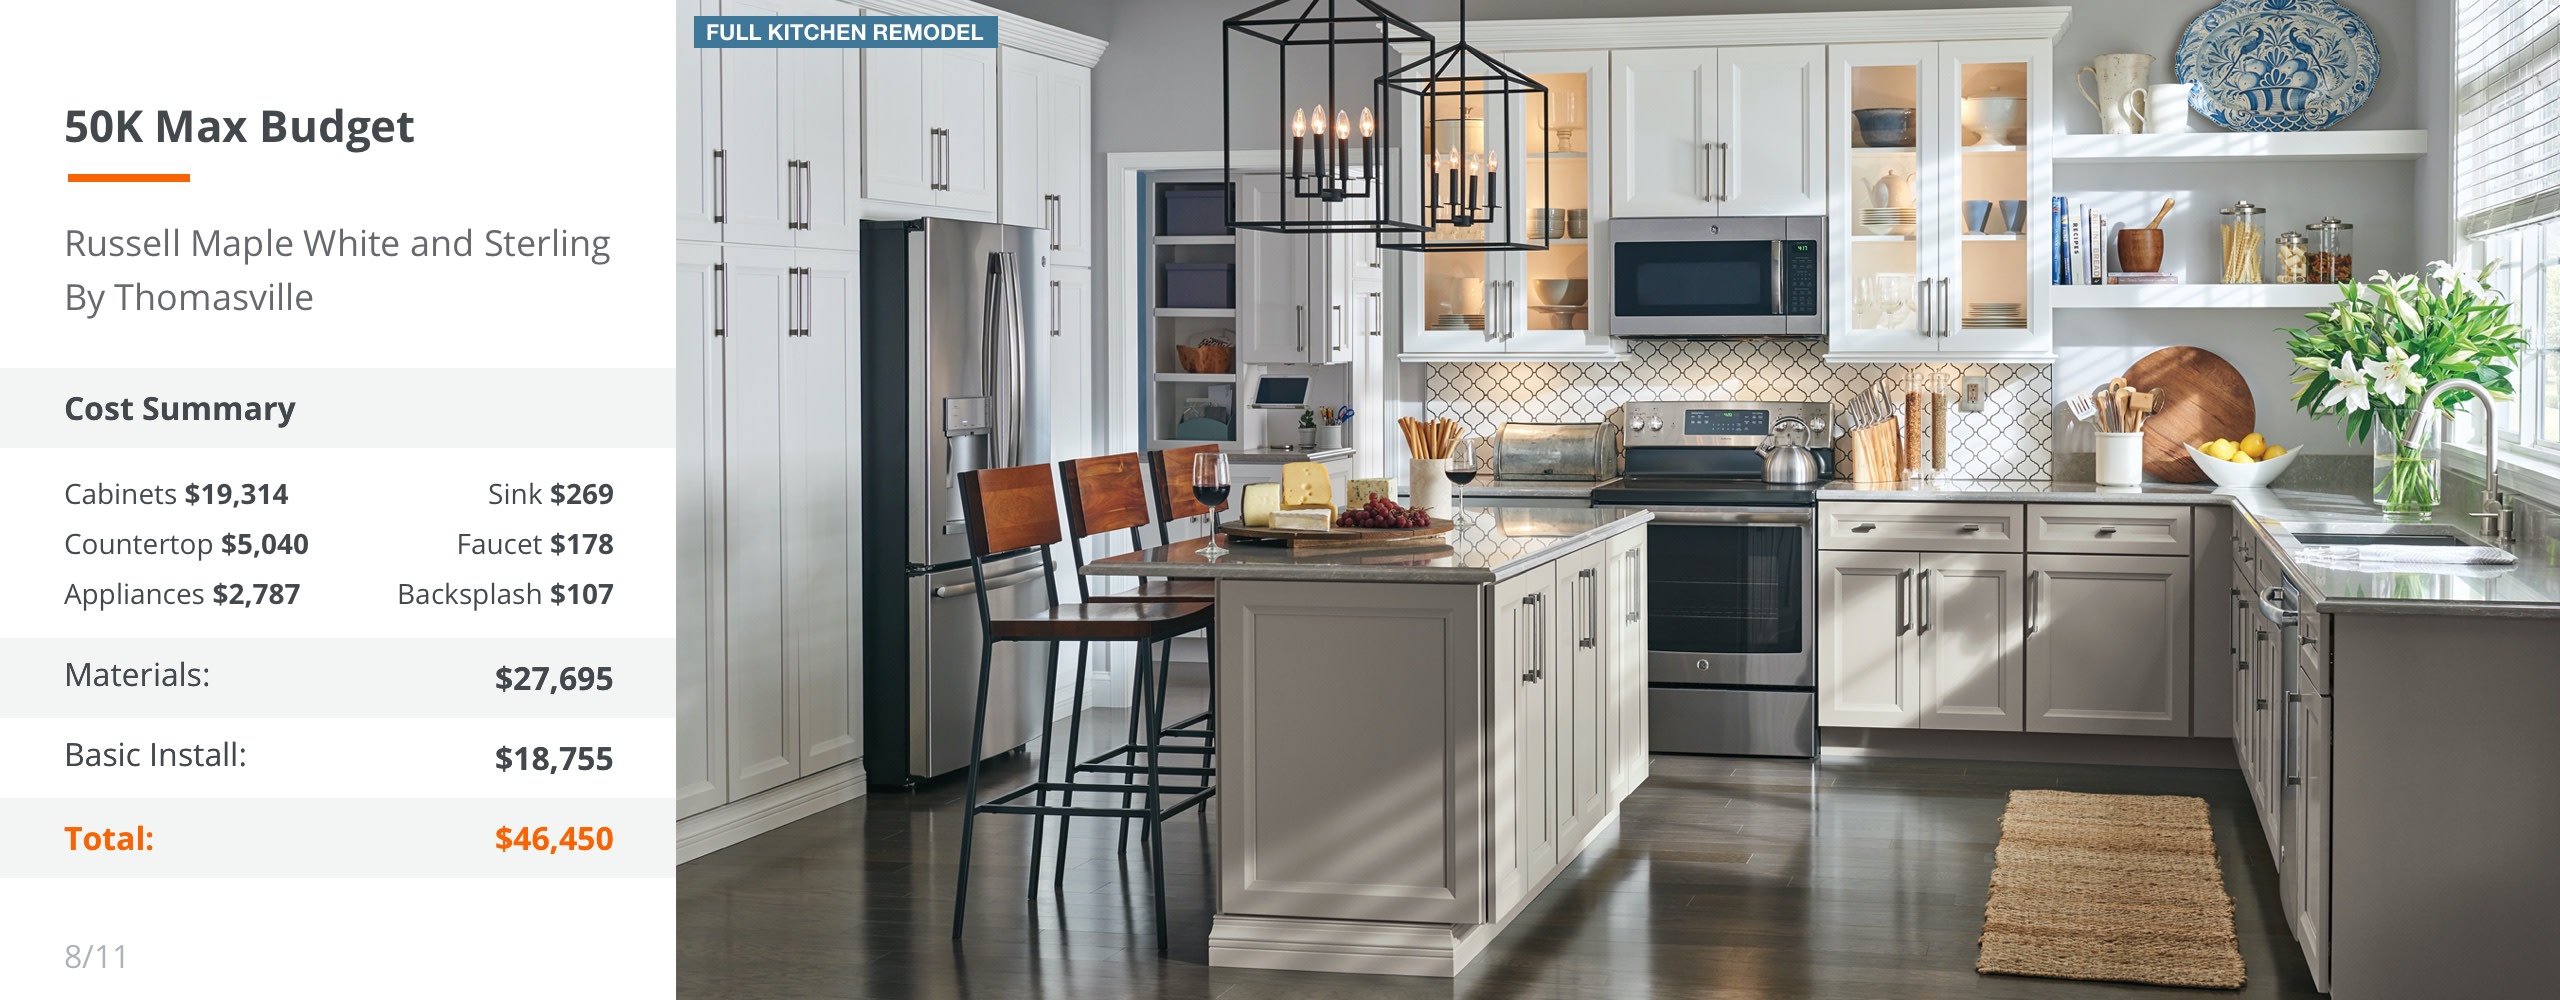 Kitchen Design Services at The Home Depot